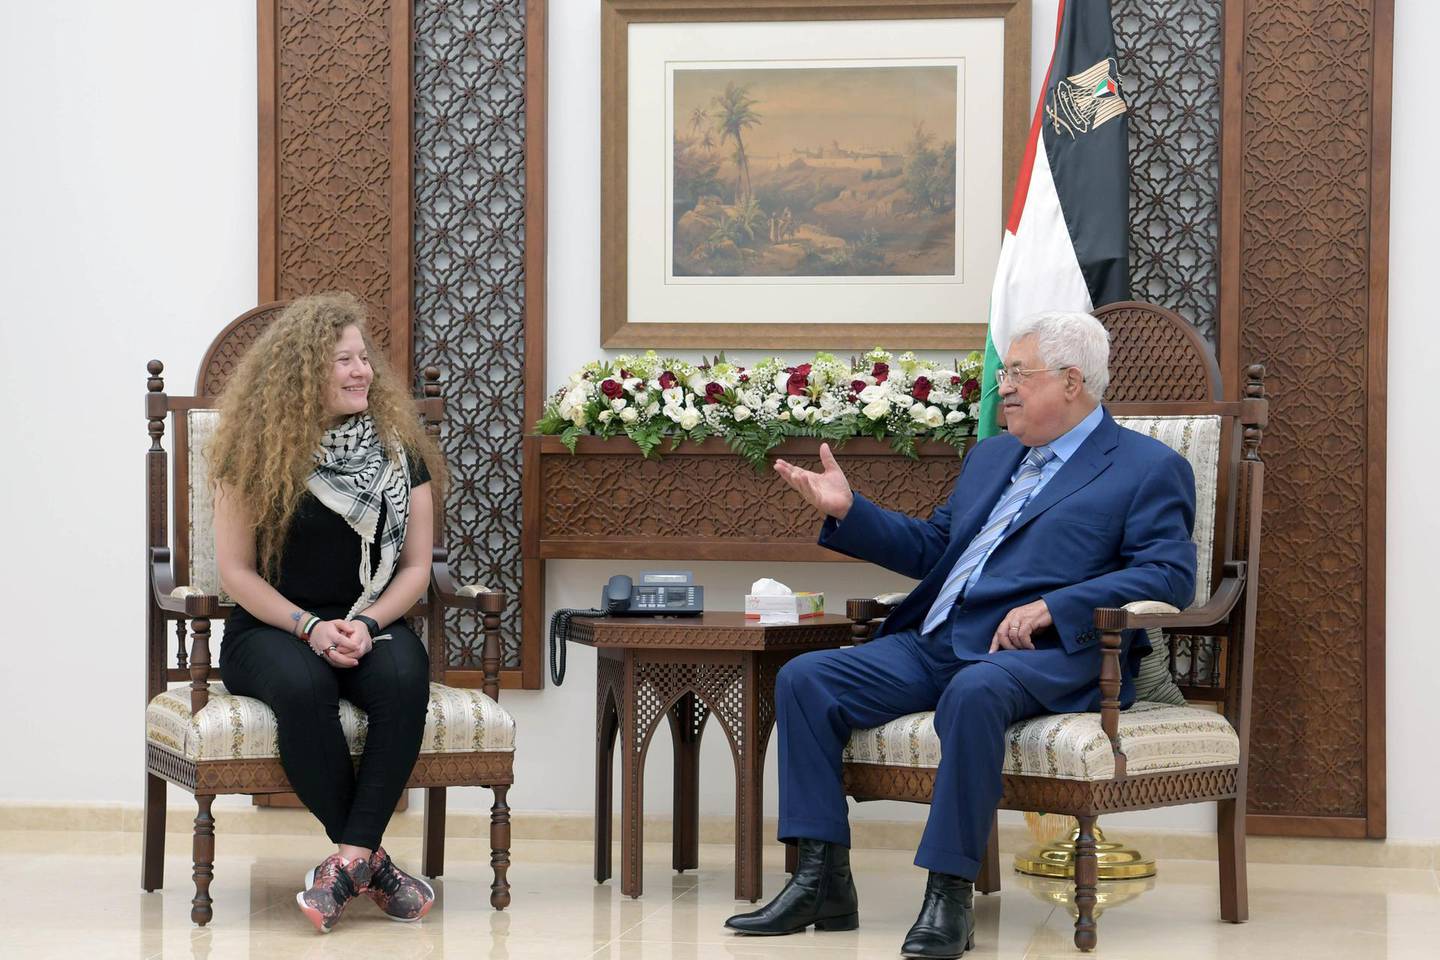 Palestinian President Mahmoud Abbas meets with Freed Palestinian teenager Ahed Tamimi after she was released from an Israeli prison, in Ramallah in the occupied West Bank July 29, 2018. PPO/Handout via REUTERS  ATTENTION EDITORS - THIS IMAGE HAS BEEN SUPPLIED BY A THIRD PARTY. NO RESALES. NO ARCHIVES.